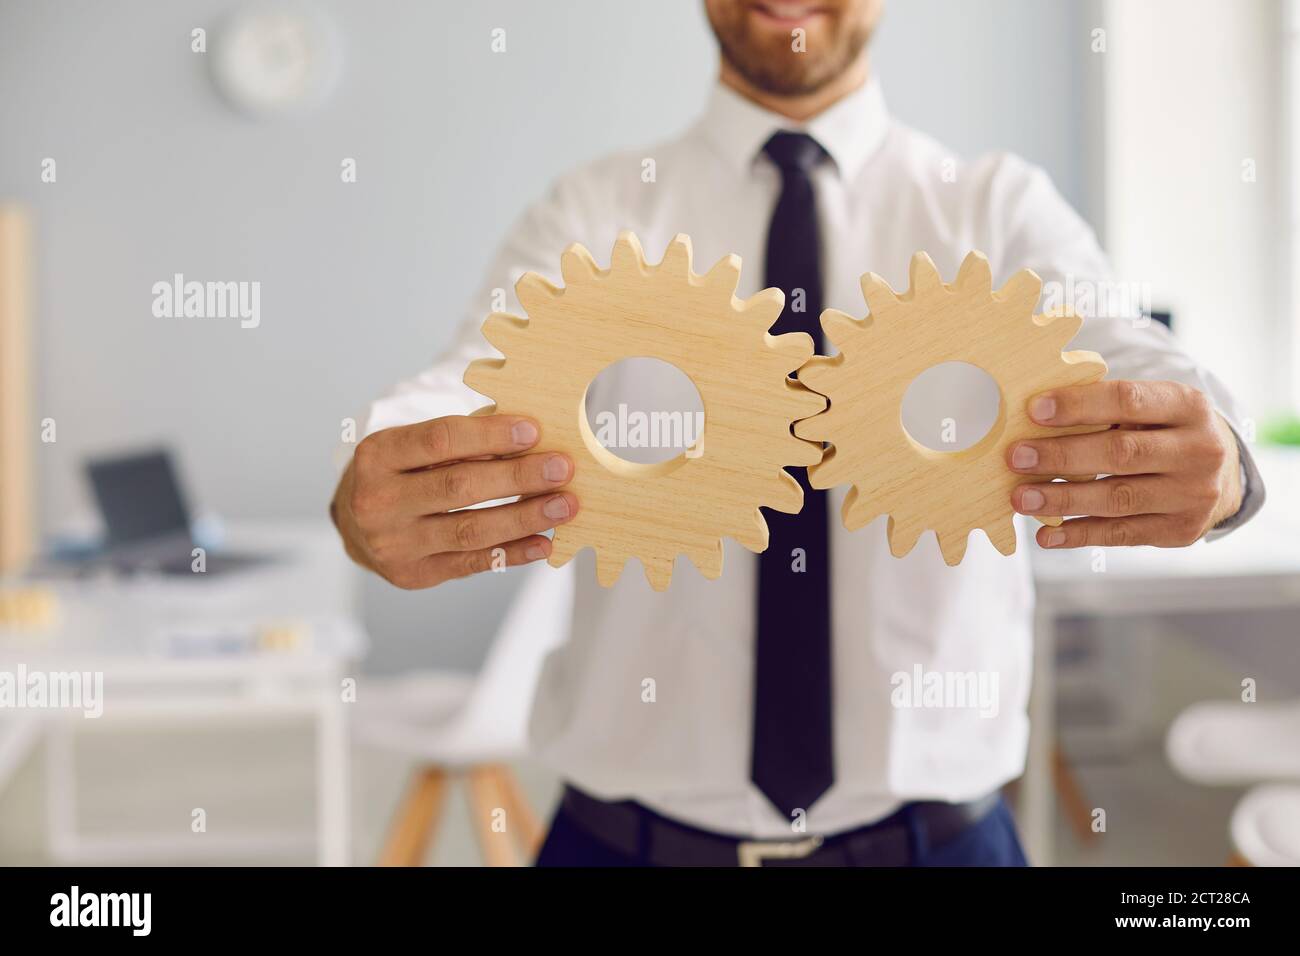 Cropped businessman holding 2 cogwheels that fit perfectly as metaphor for effective business system Stock Photo